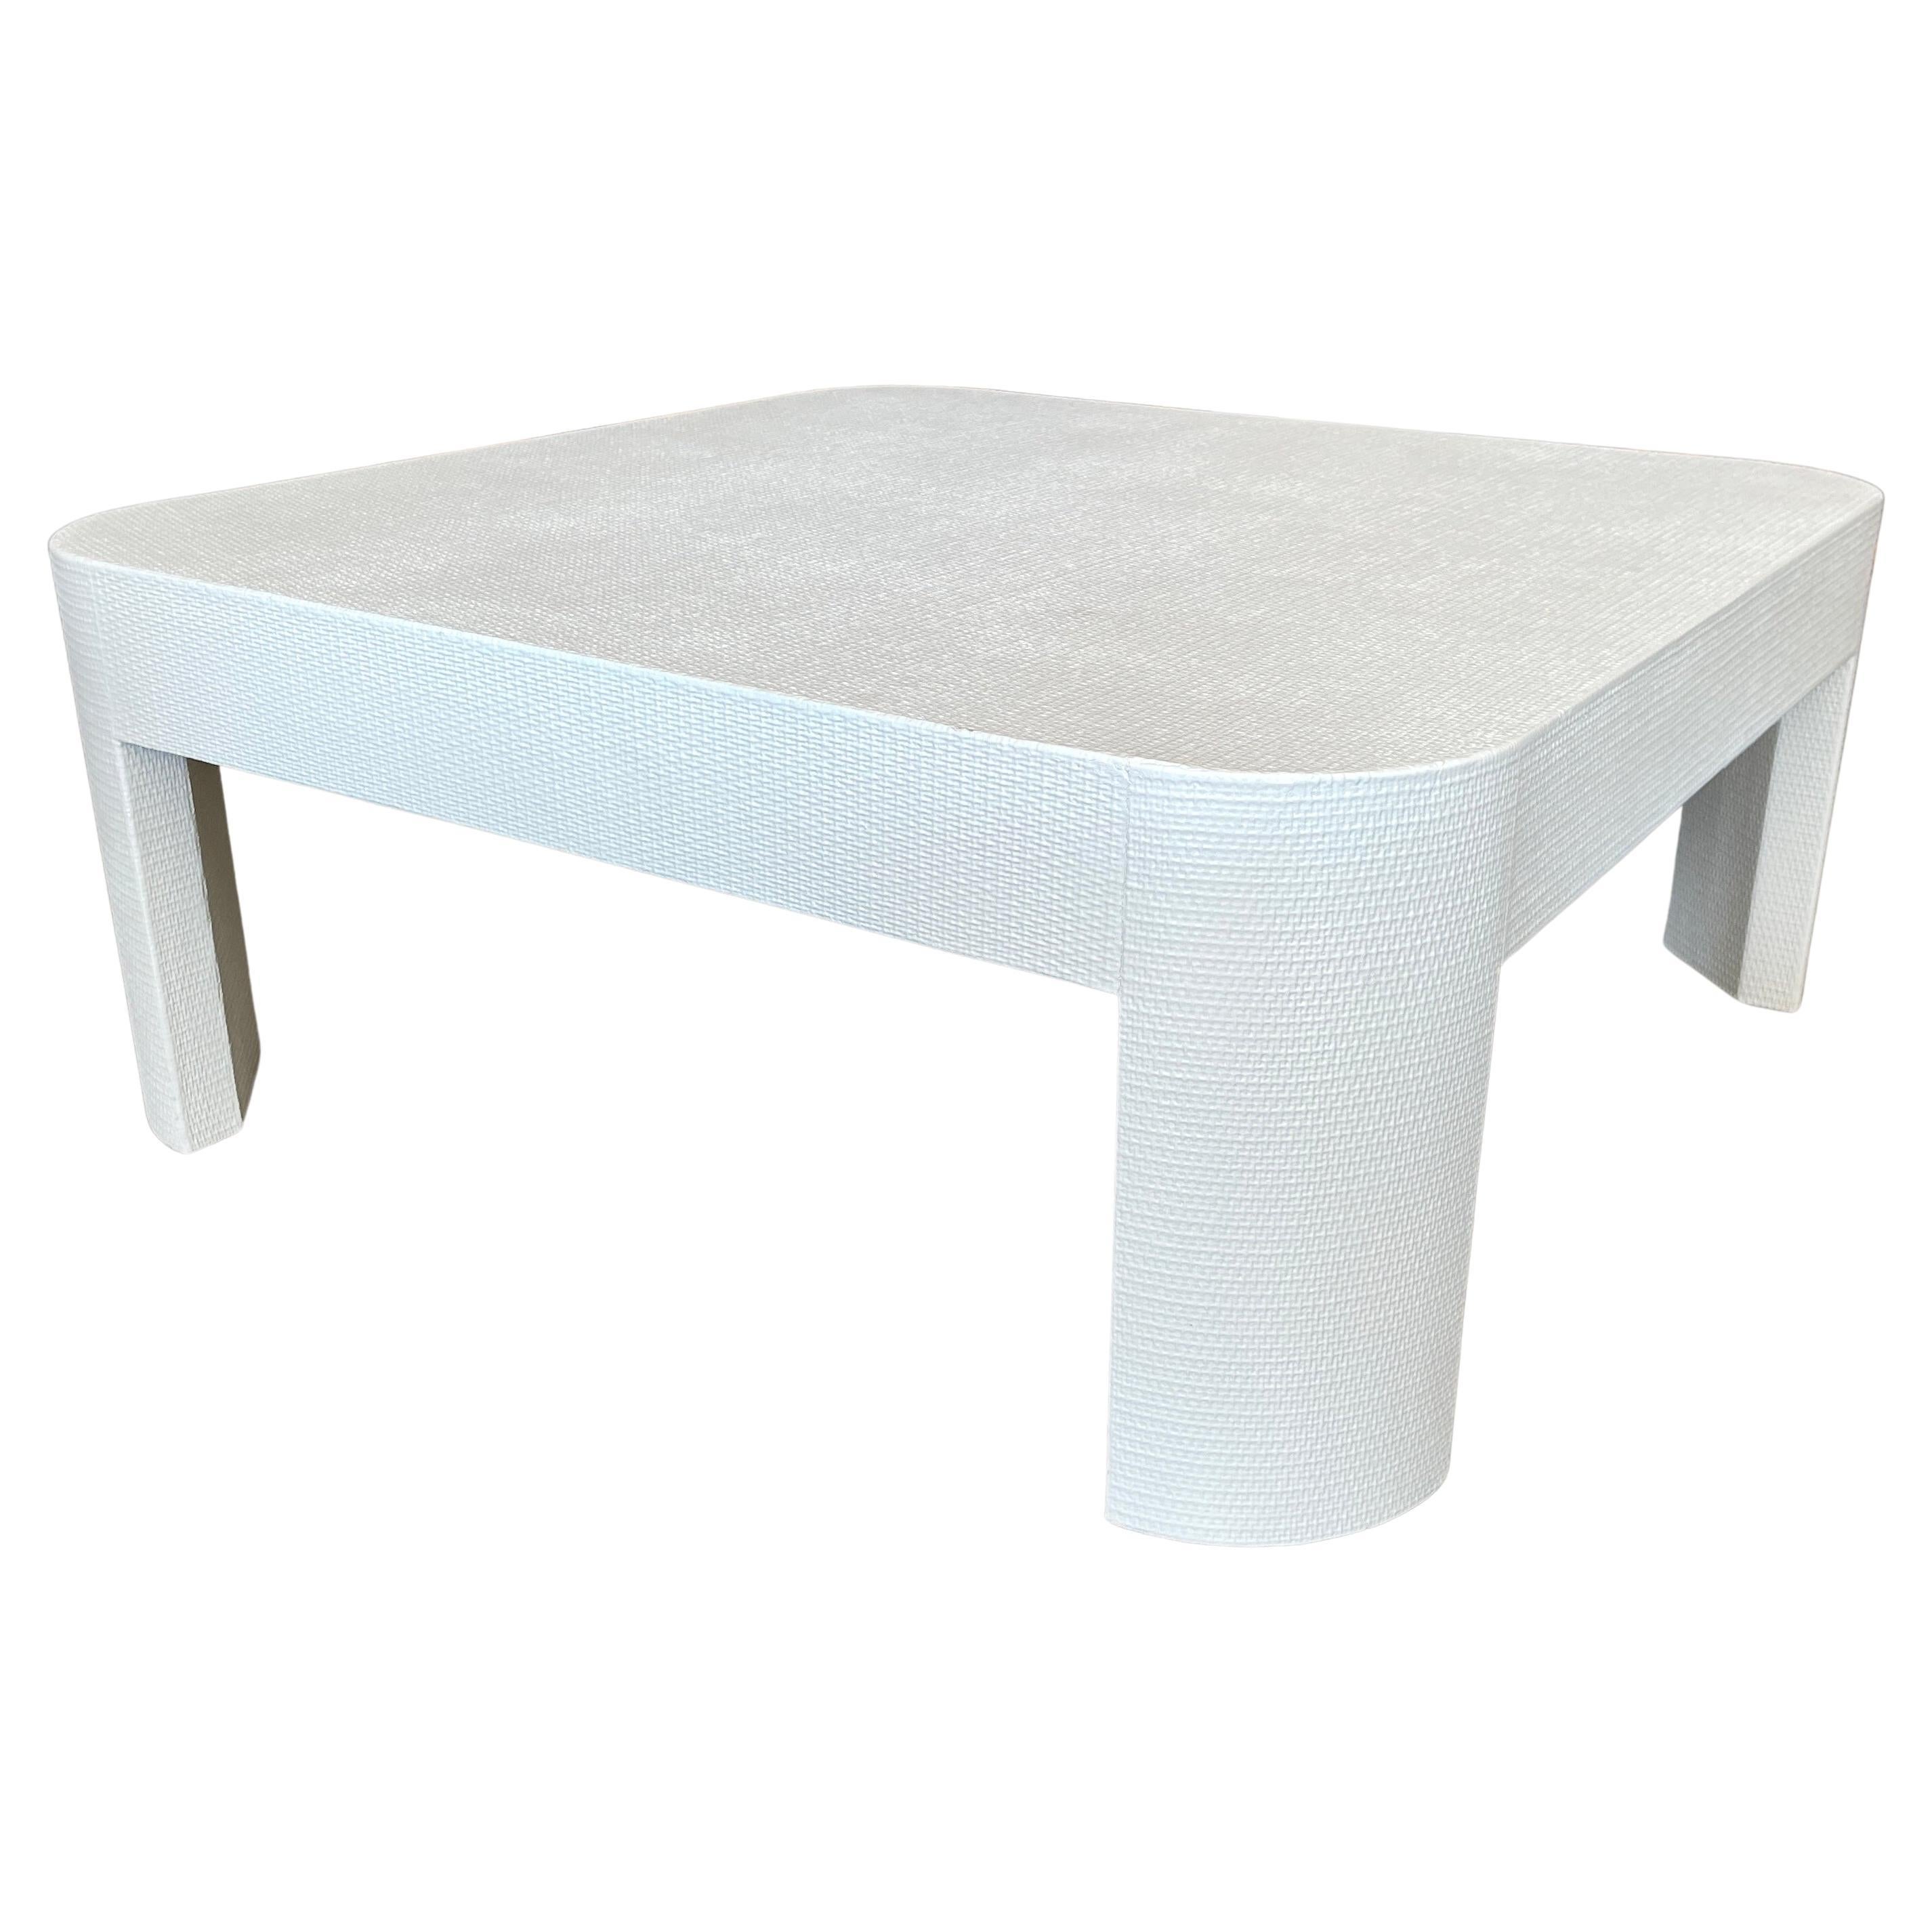 Karl Springer Lacquered Linen Square Coffee Table